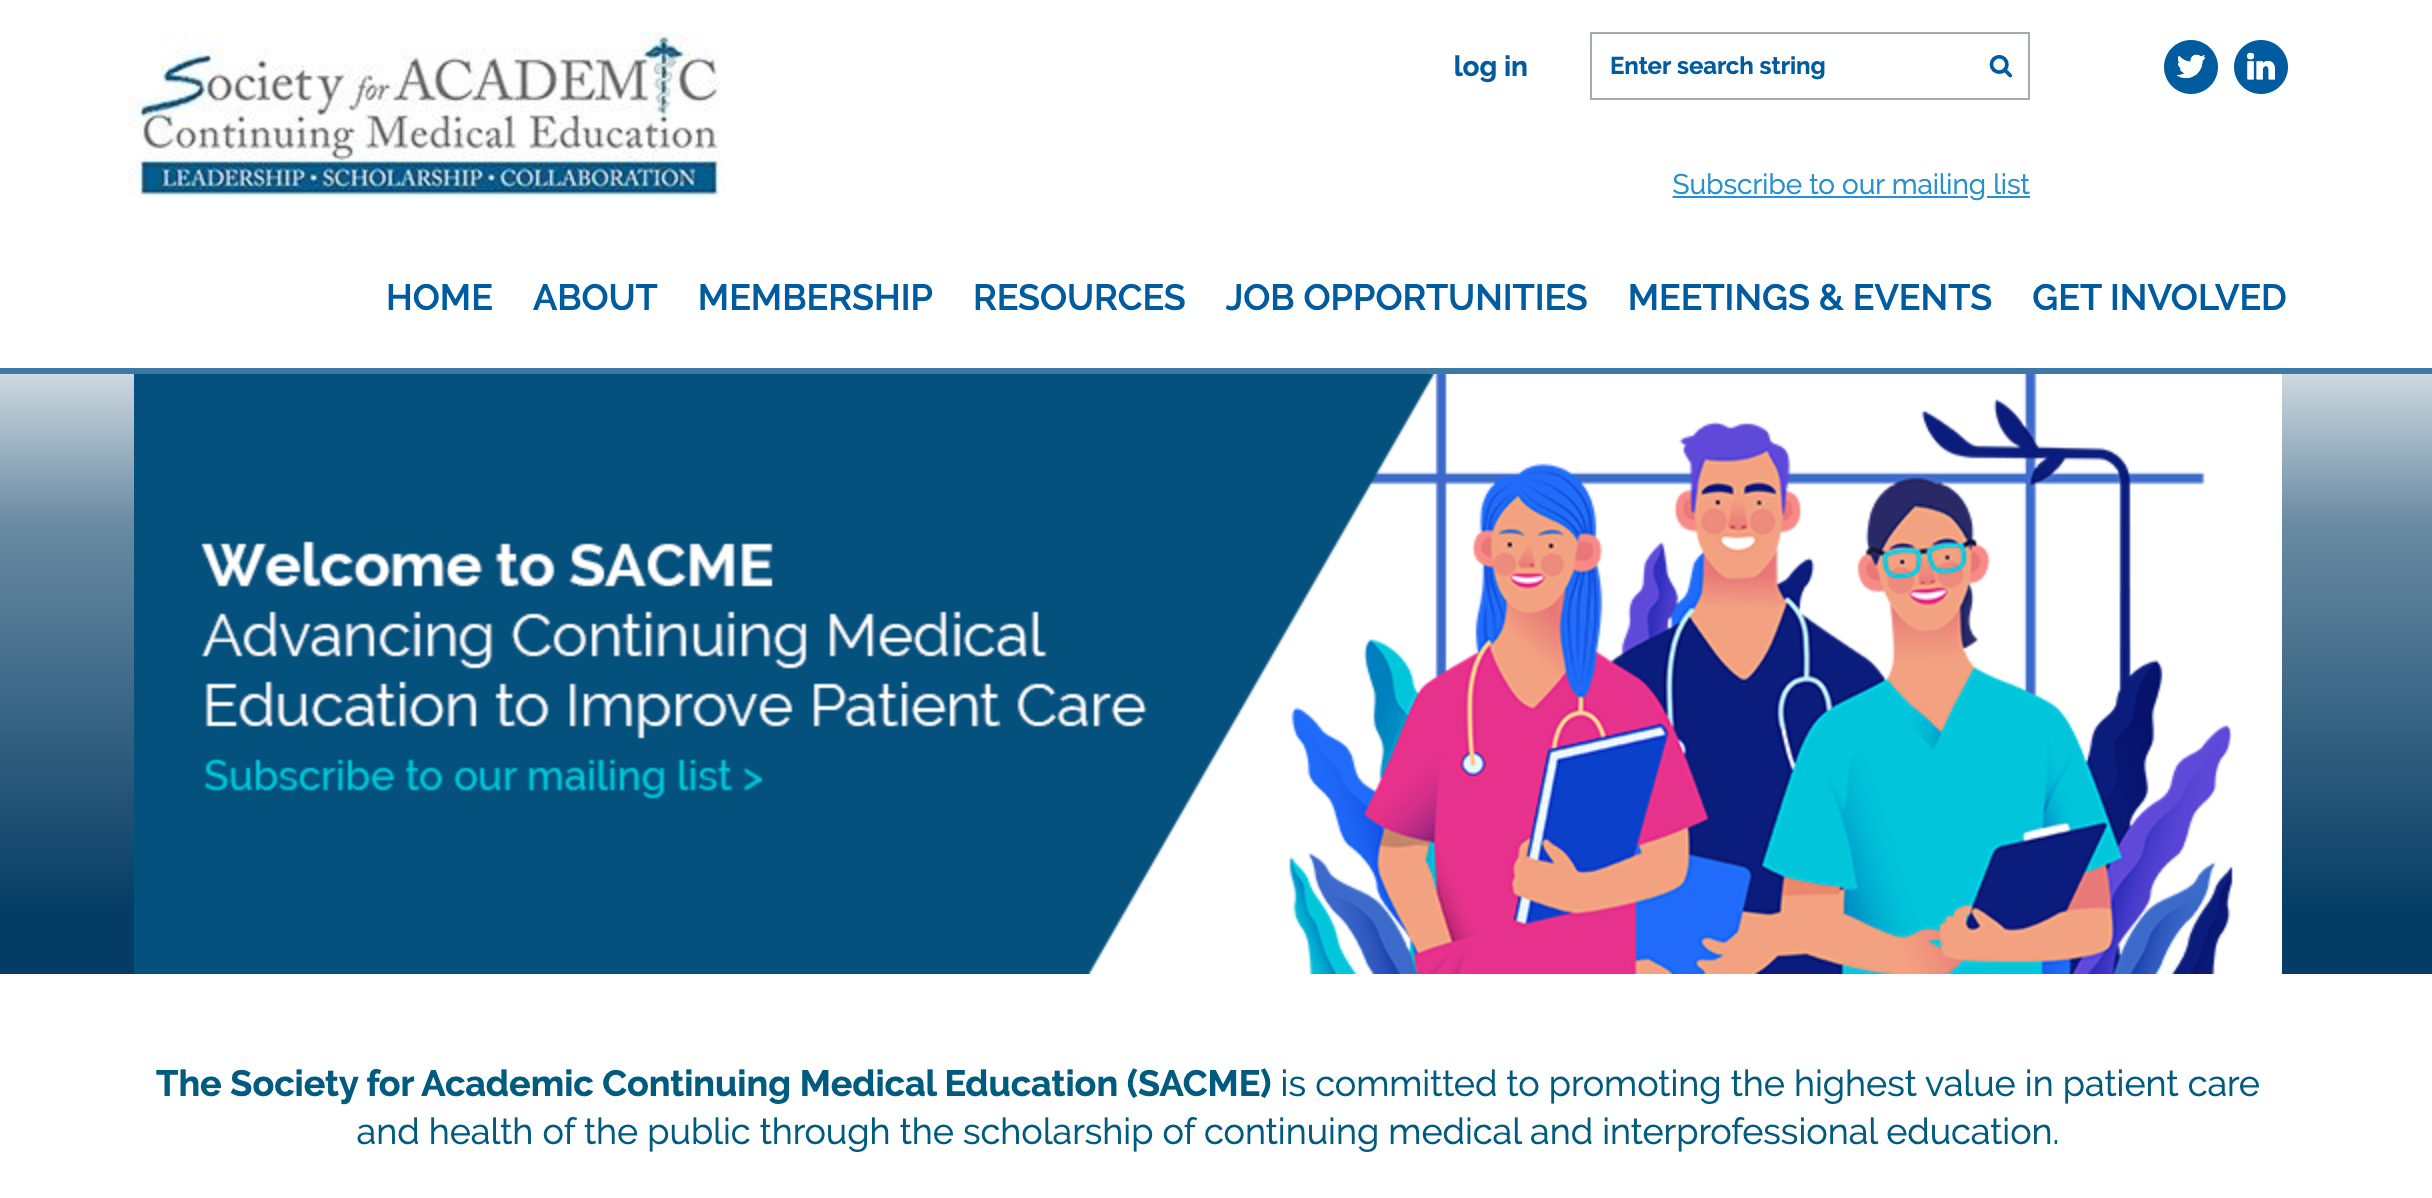 Society for Academic Continuing Medical Education website